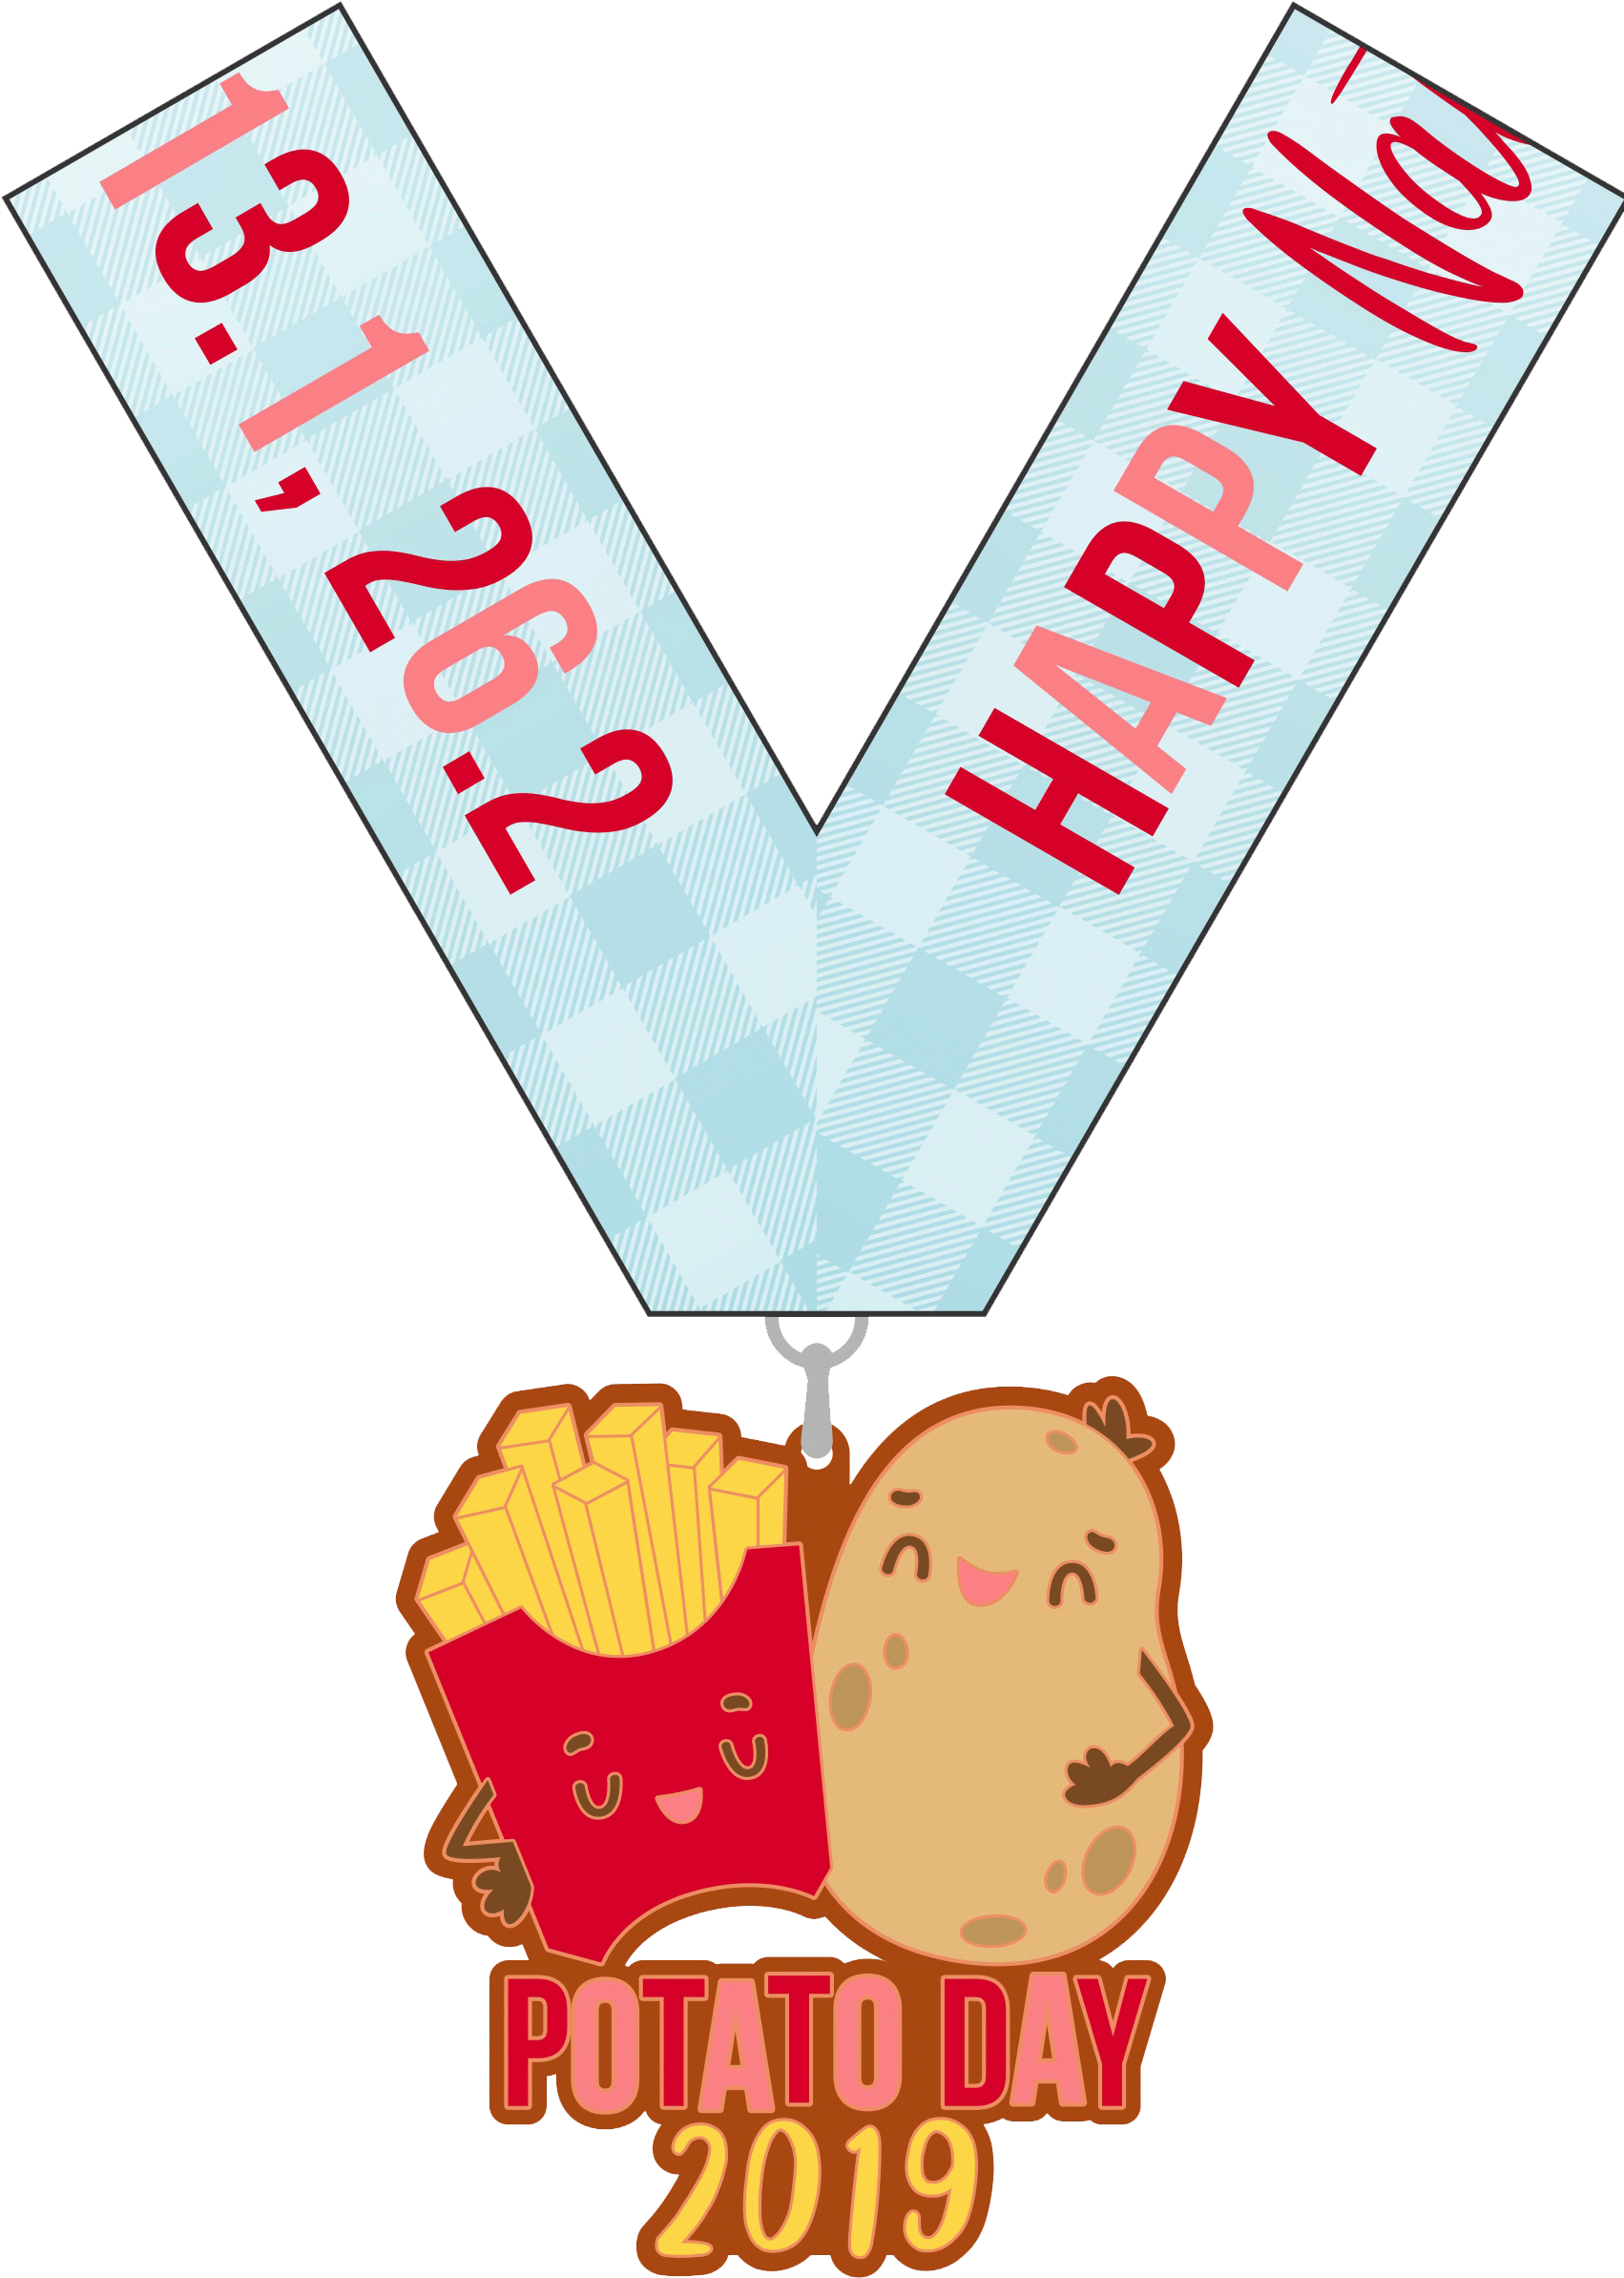 We Are So Excited To Celebrate Our Favorite Spuds And - We Are So Excited To Celebrate Our Favorite Spuds And (1710x2456)